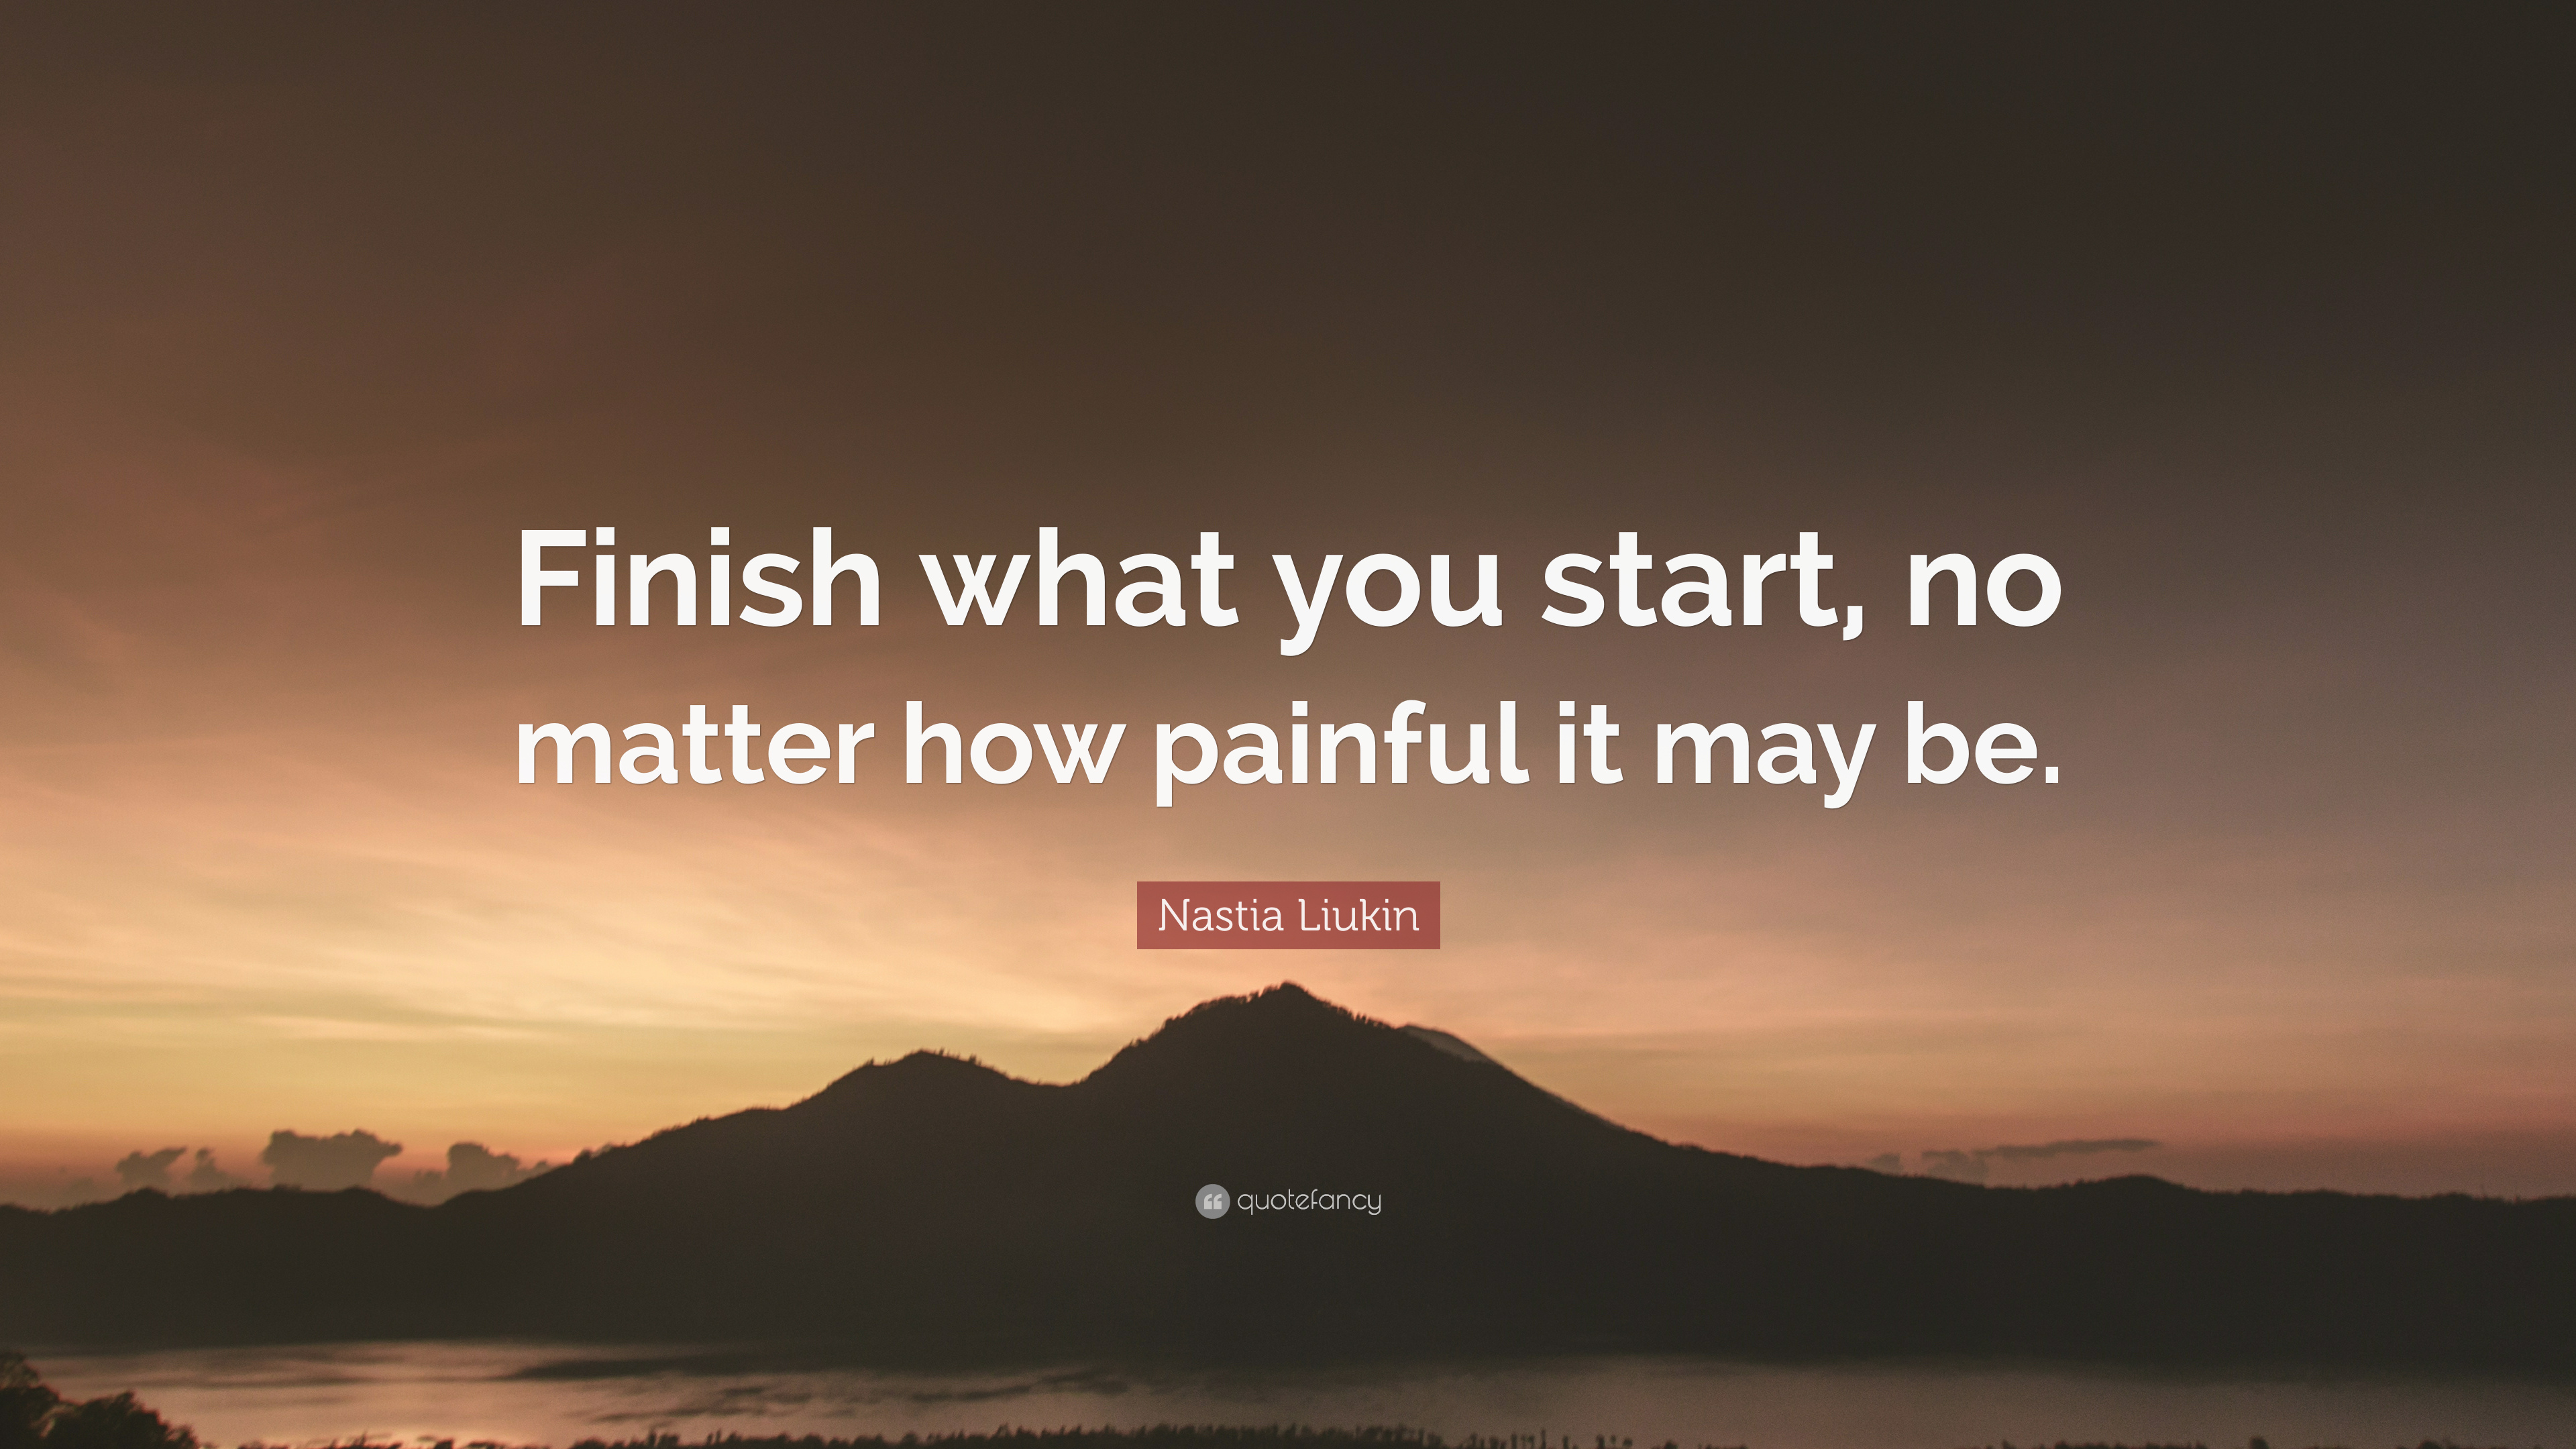 Nastia Liukin Quote: “Finish what you start, no matter how painful it may be.”